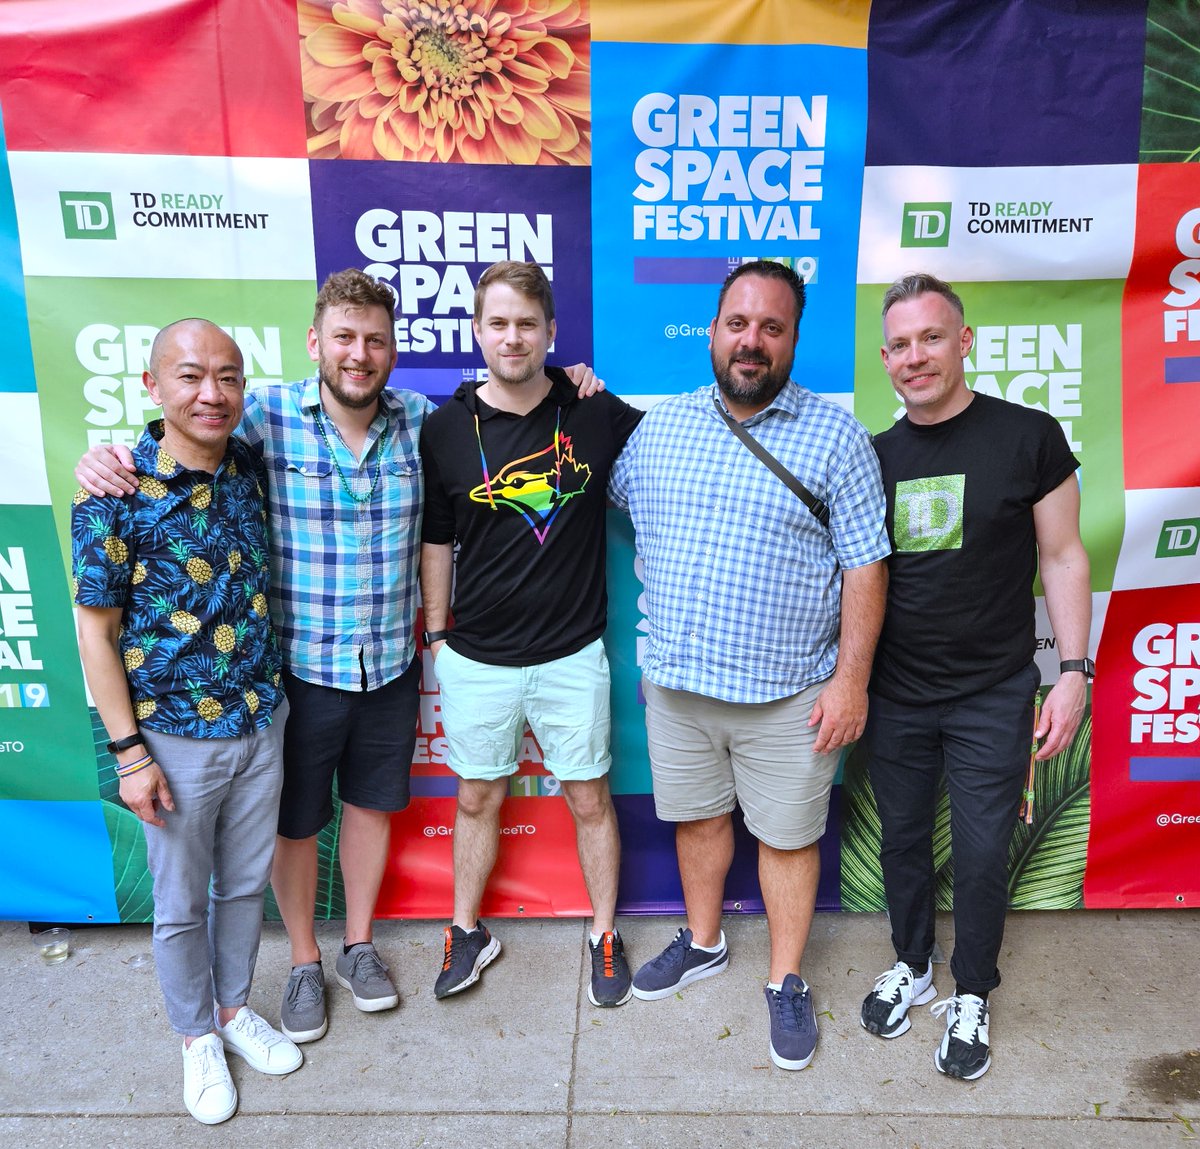 Celebrating Toronto Pride Week at the Green Space Festival Starry Night VIP Reception with past & present managers of the TD branch @ChurchWellesley, proudly serving the 2SLGBTQ+ community in Toronto for the past 39 years! #ForeverProud #ForeverProgressing #TDPride365 #Pride2023